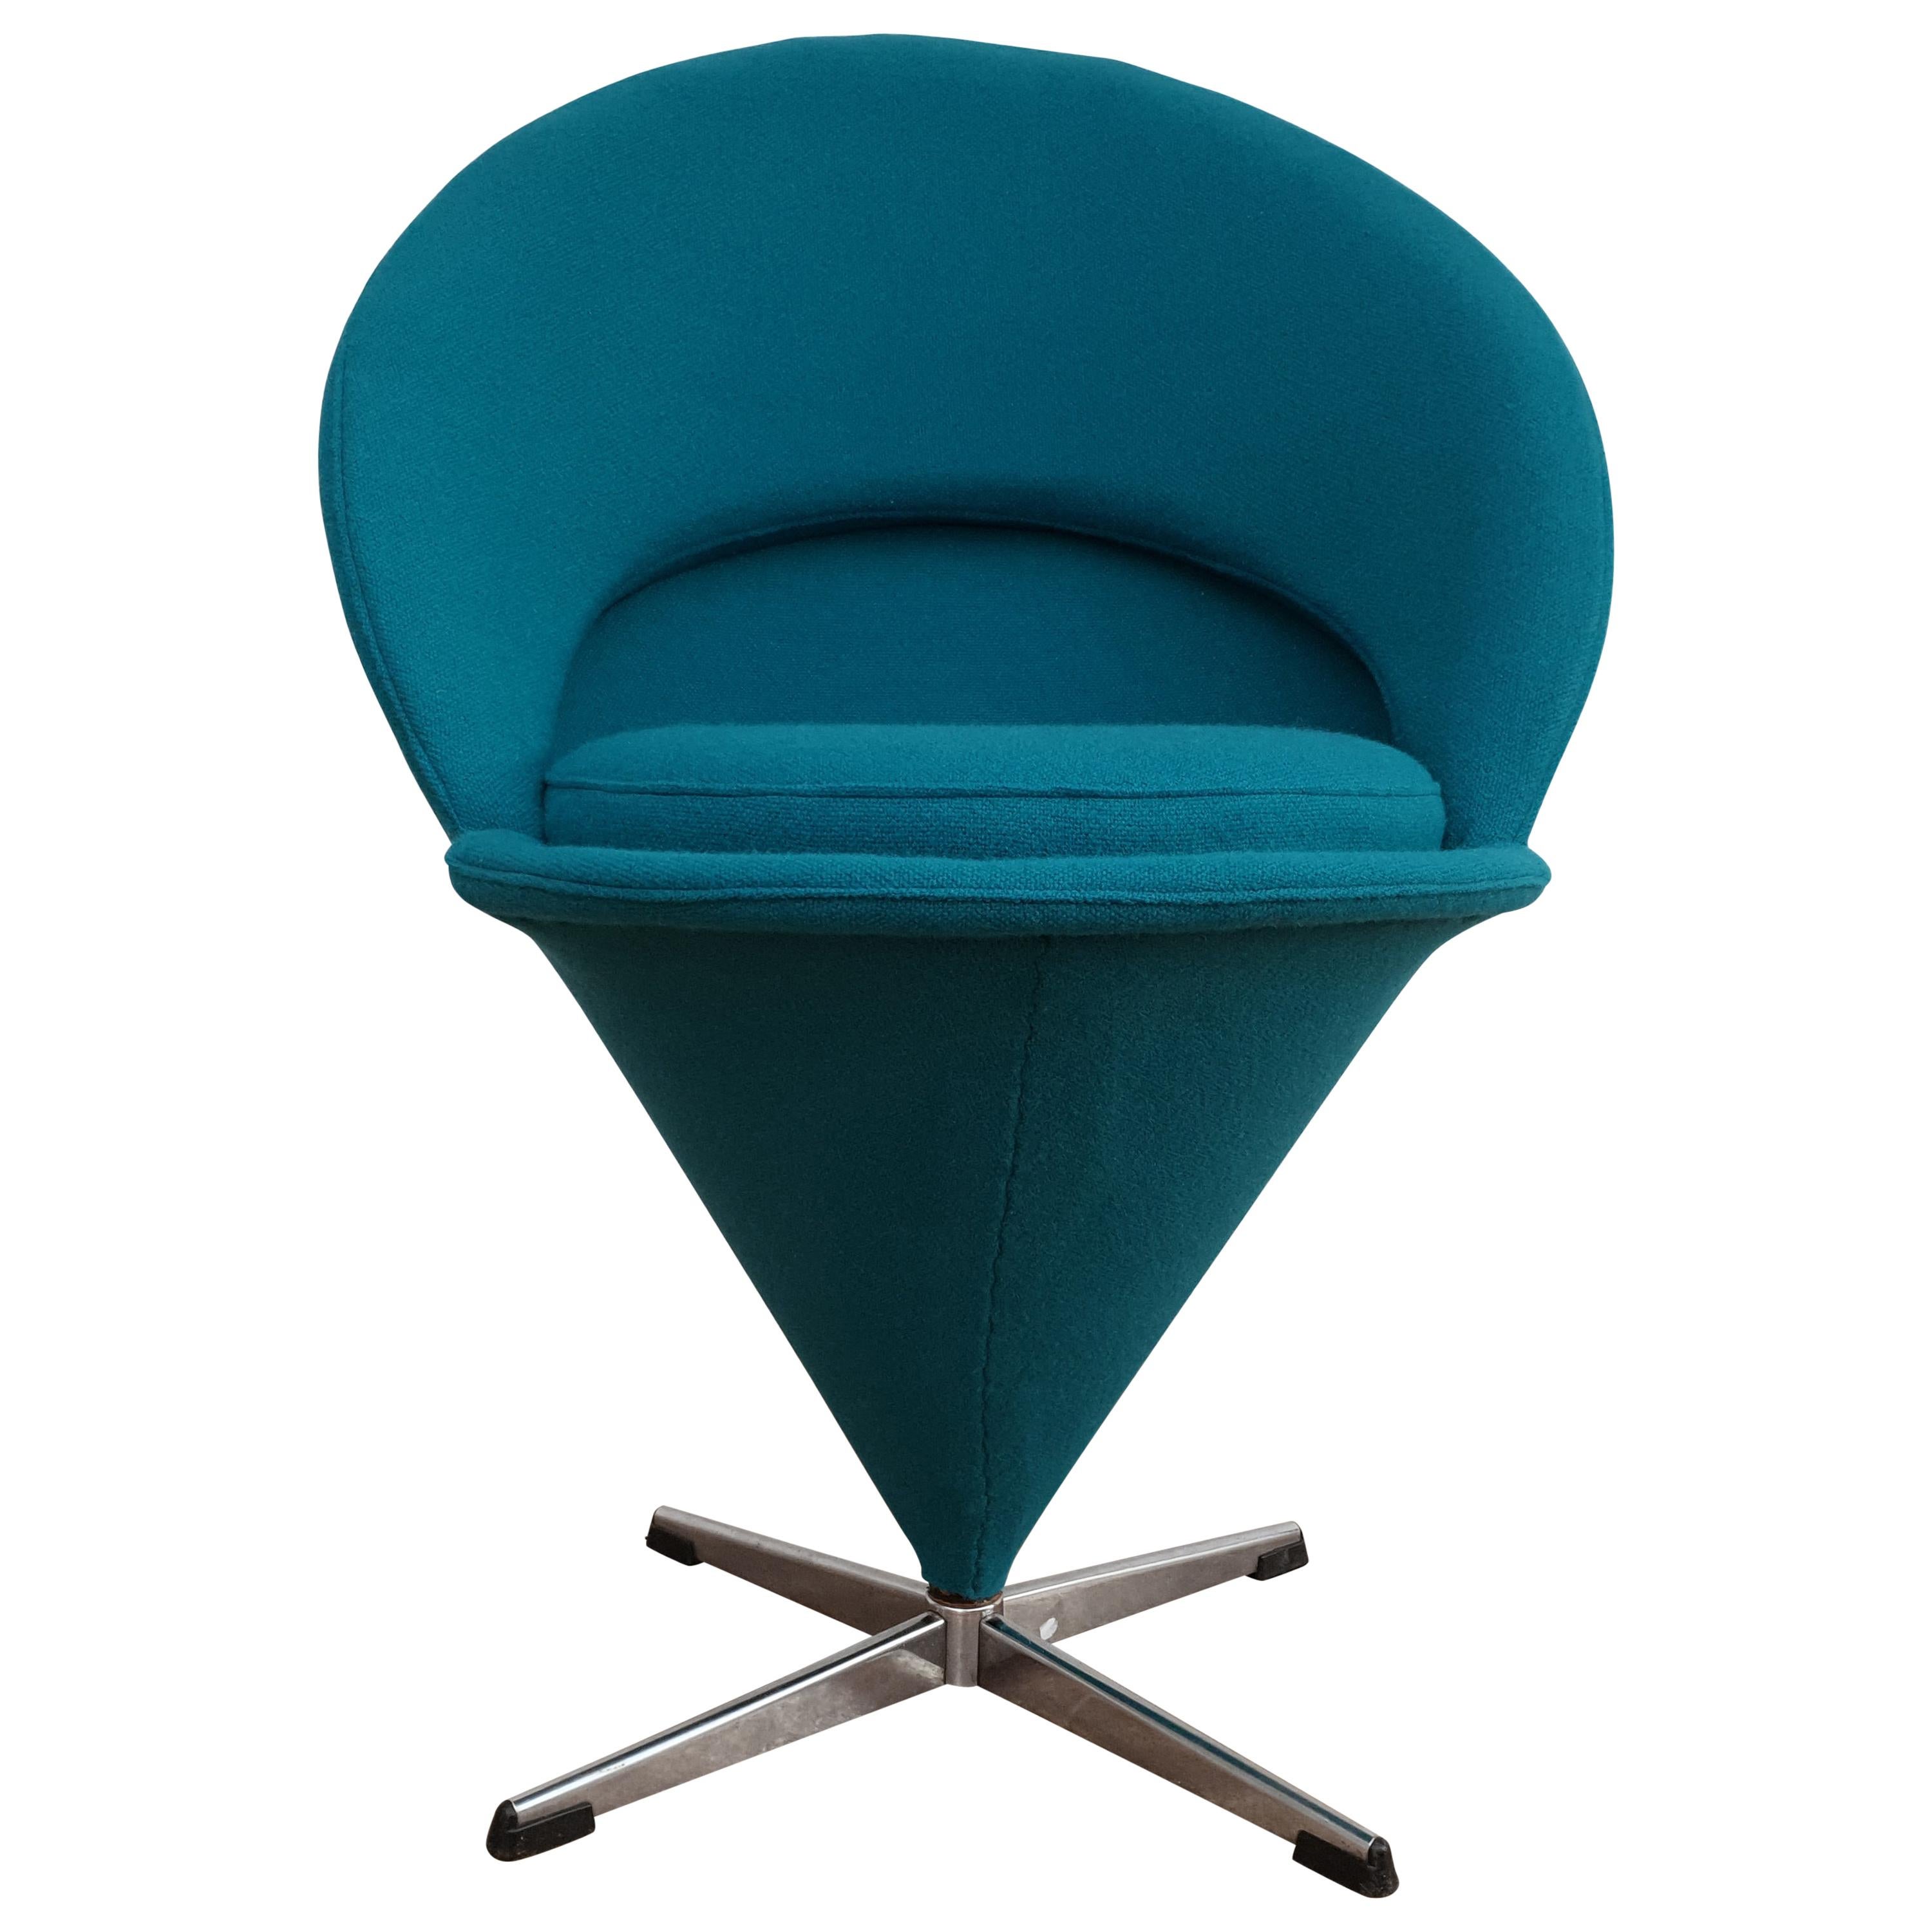 Danish Design, Verner Panton, "Cone Chair" Completely Renovated, 1970s